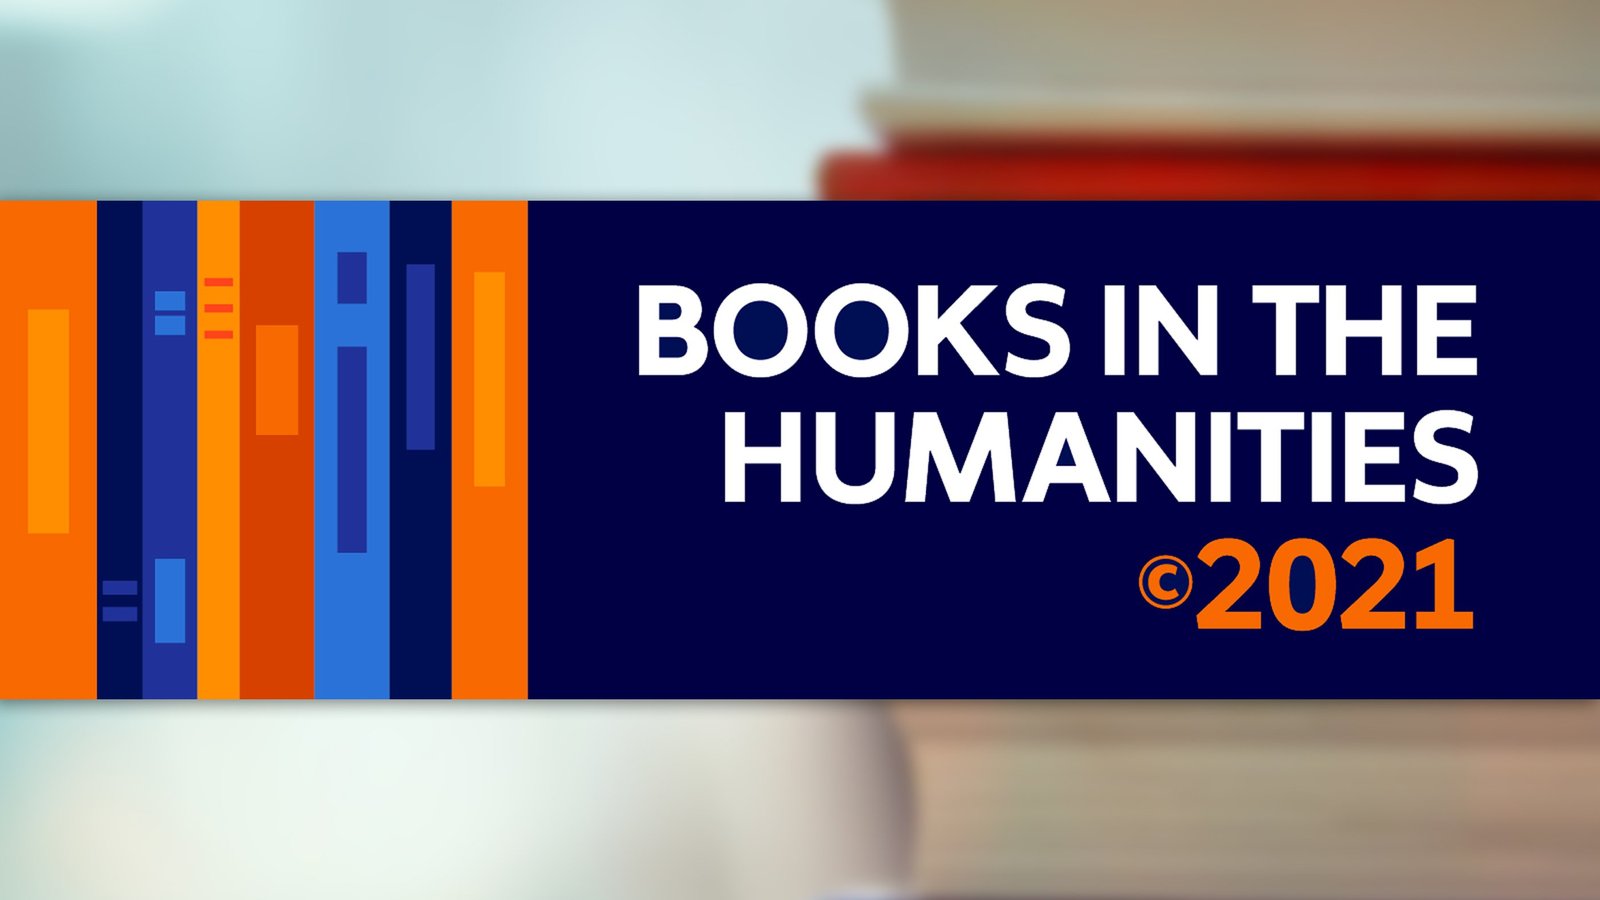 books in the humanities 2021 banner imposed over stack of hardcover books